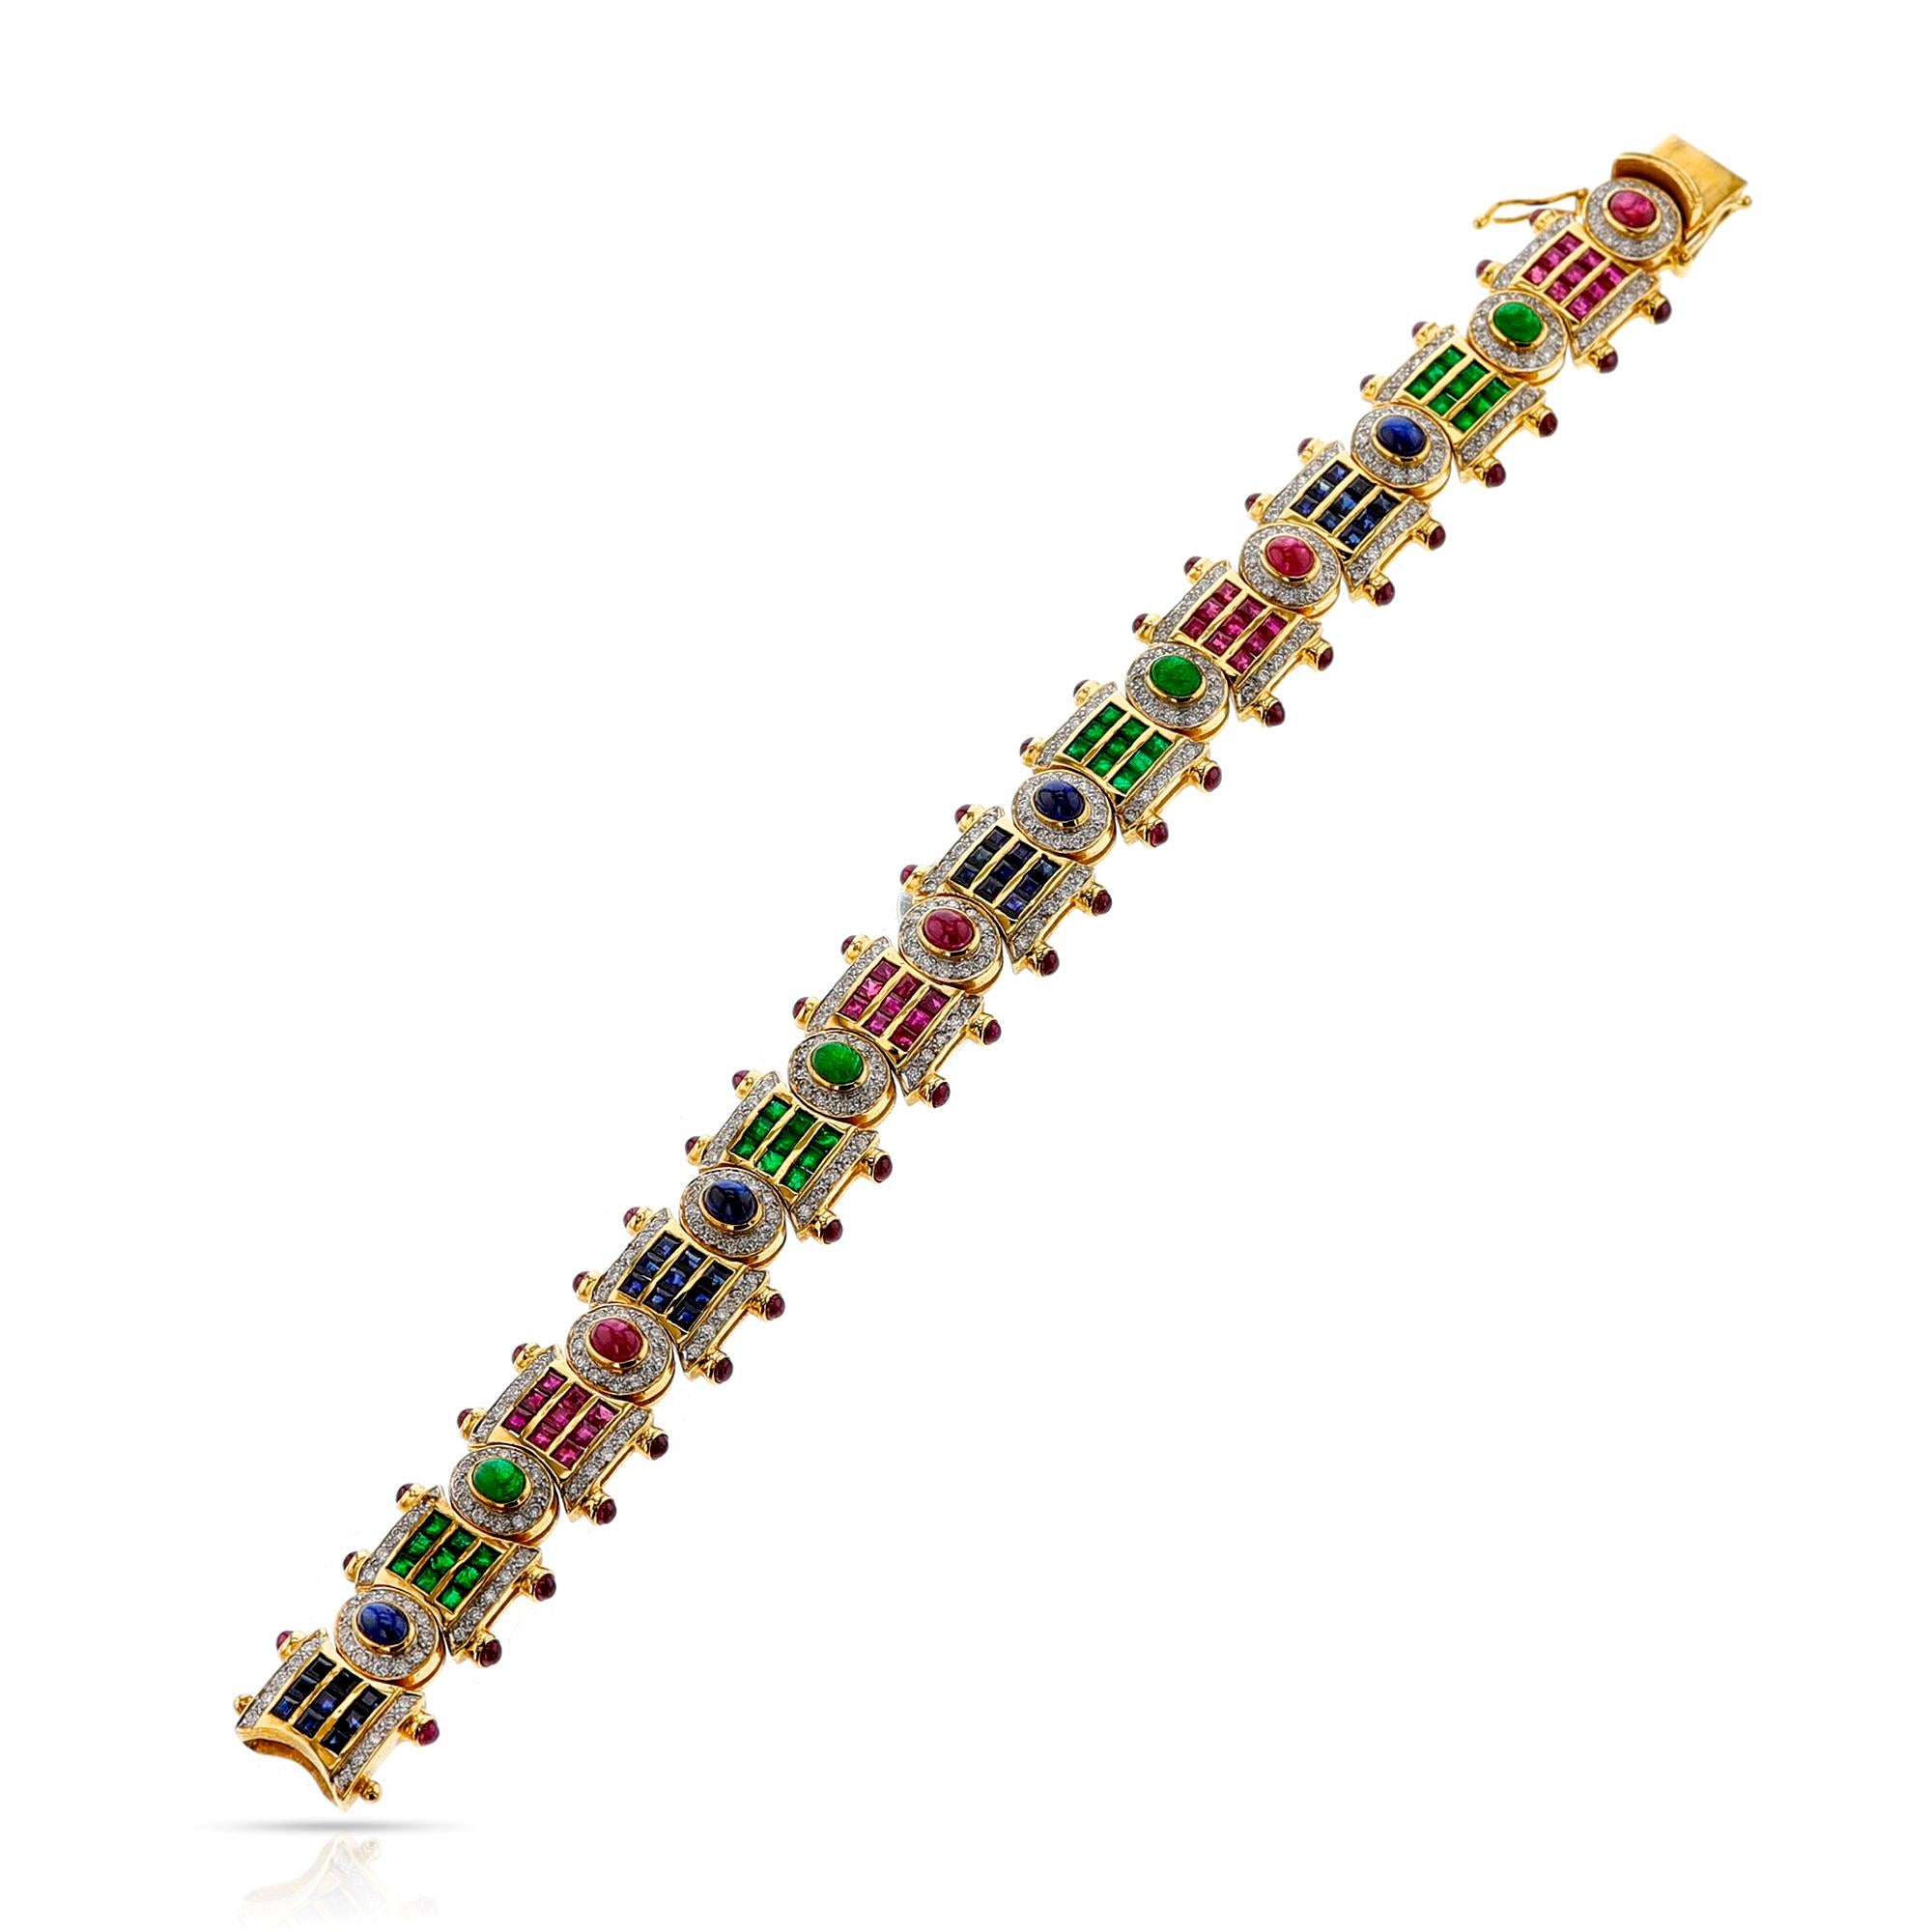 Ruby, Emerald, Sapphire, Diamond, Mixed Cut and Cabochon Bracelet, 18k In Excellent Condition For Sale In New York, NY